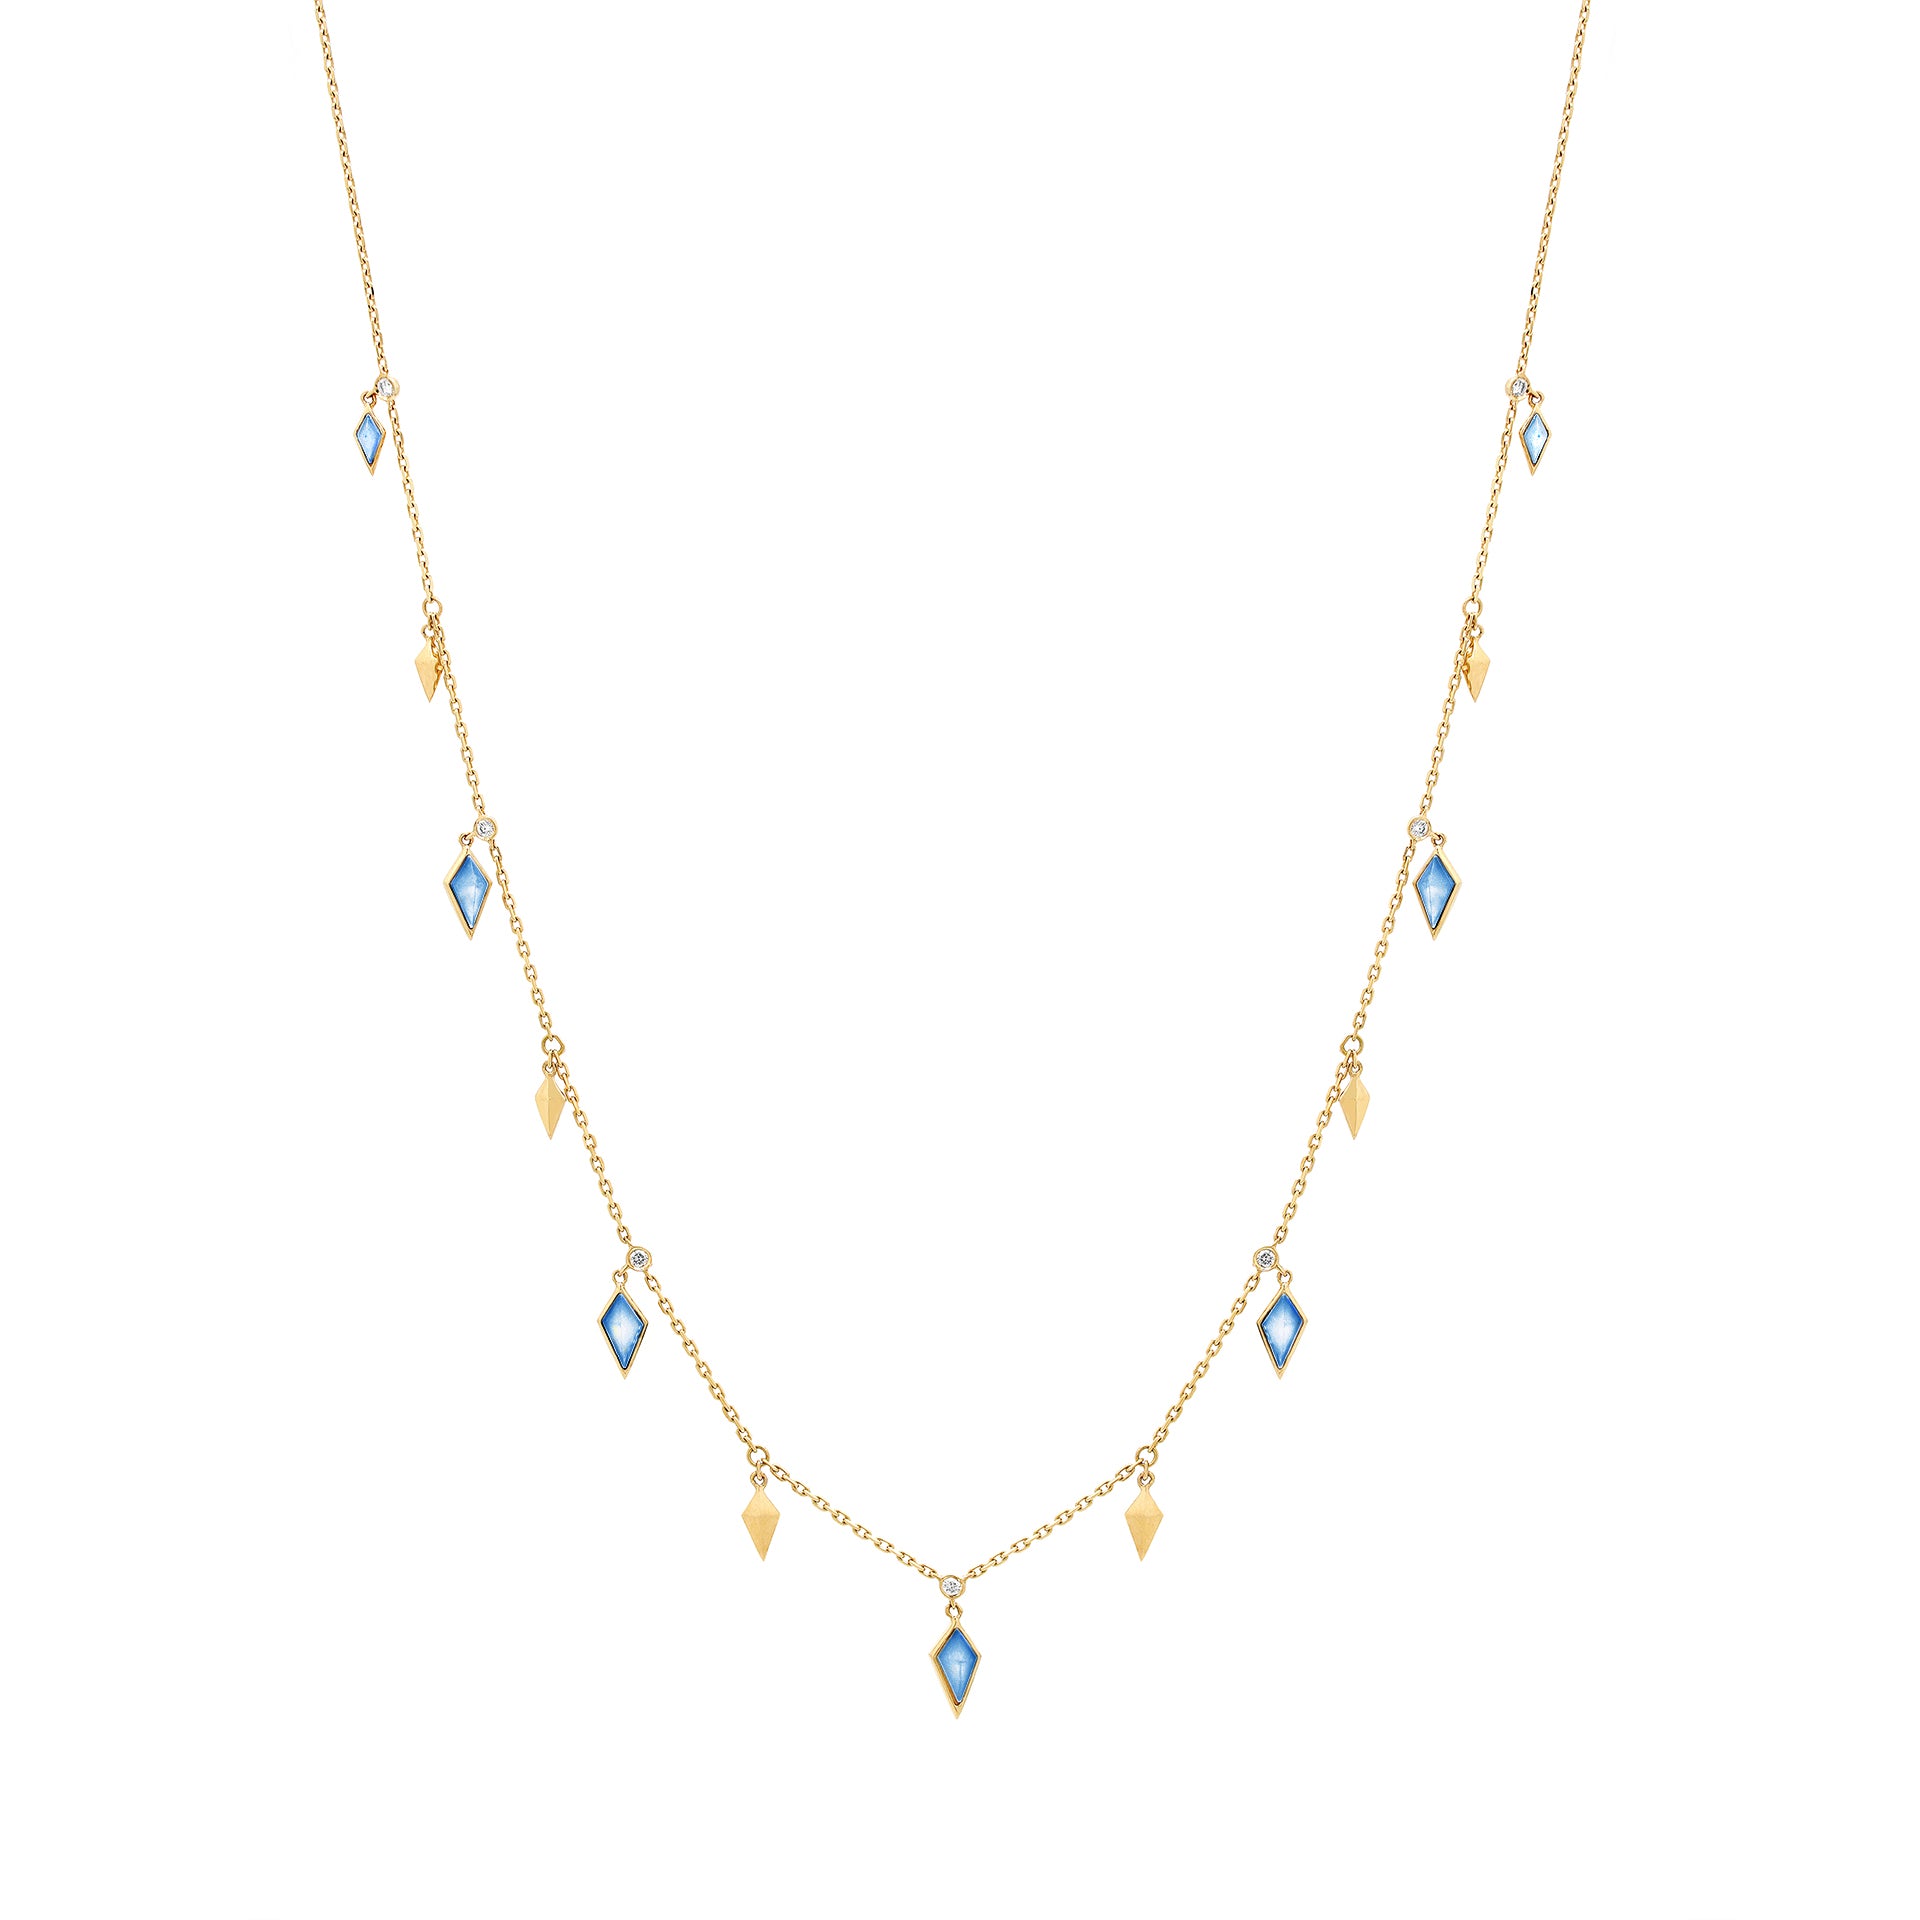 Al Merta’shah Necklace in Diamonds and Blue Agate